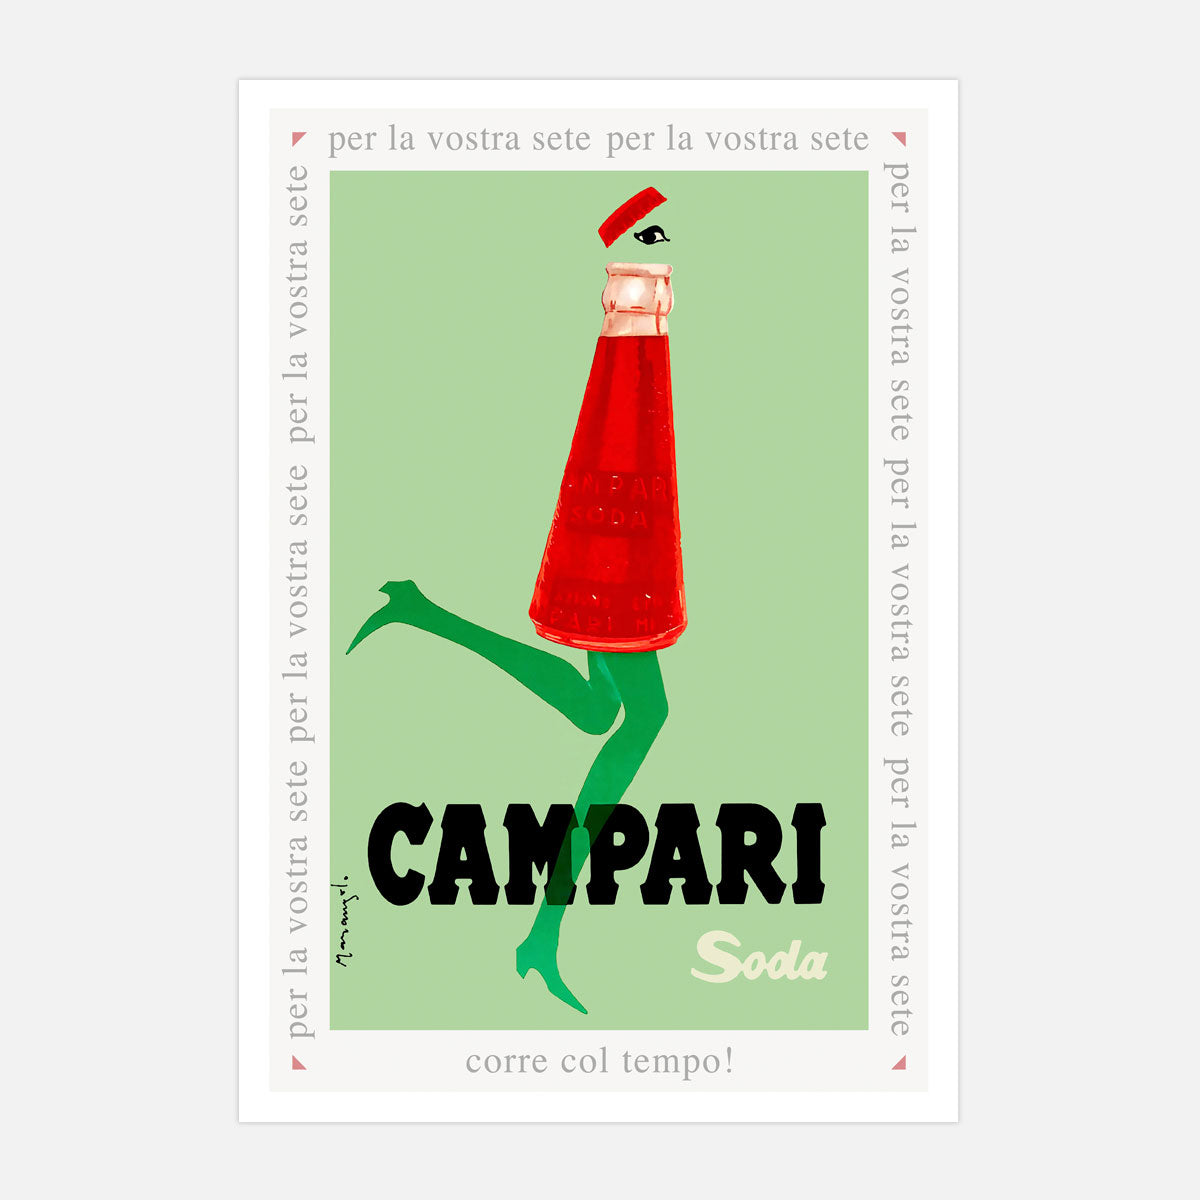 Campari Soda vintage retro advertising poster print from Places We Luv